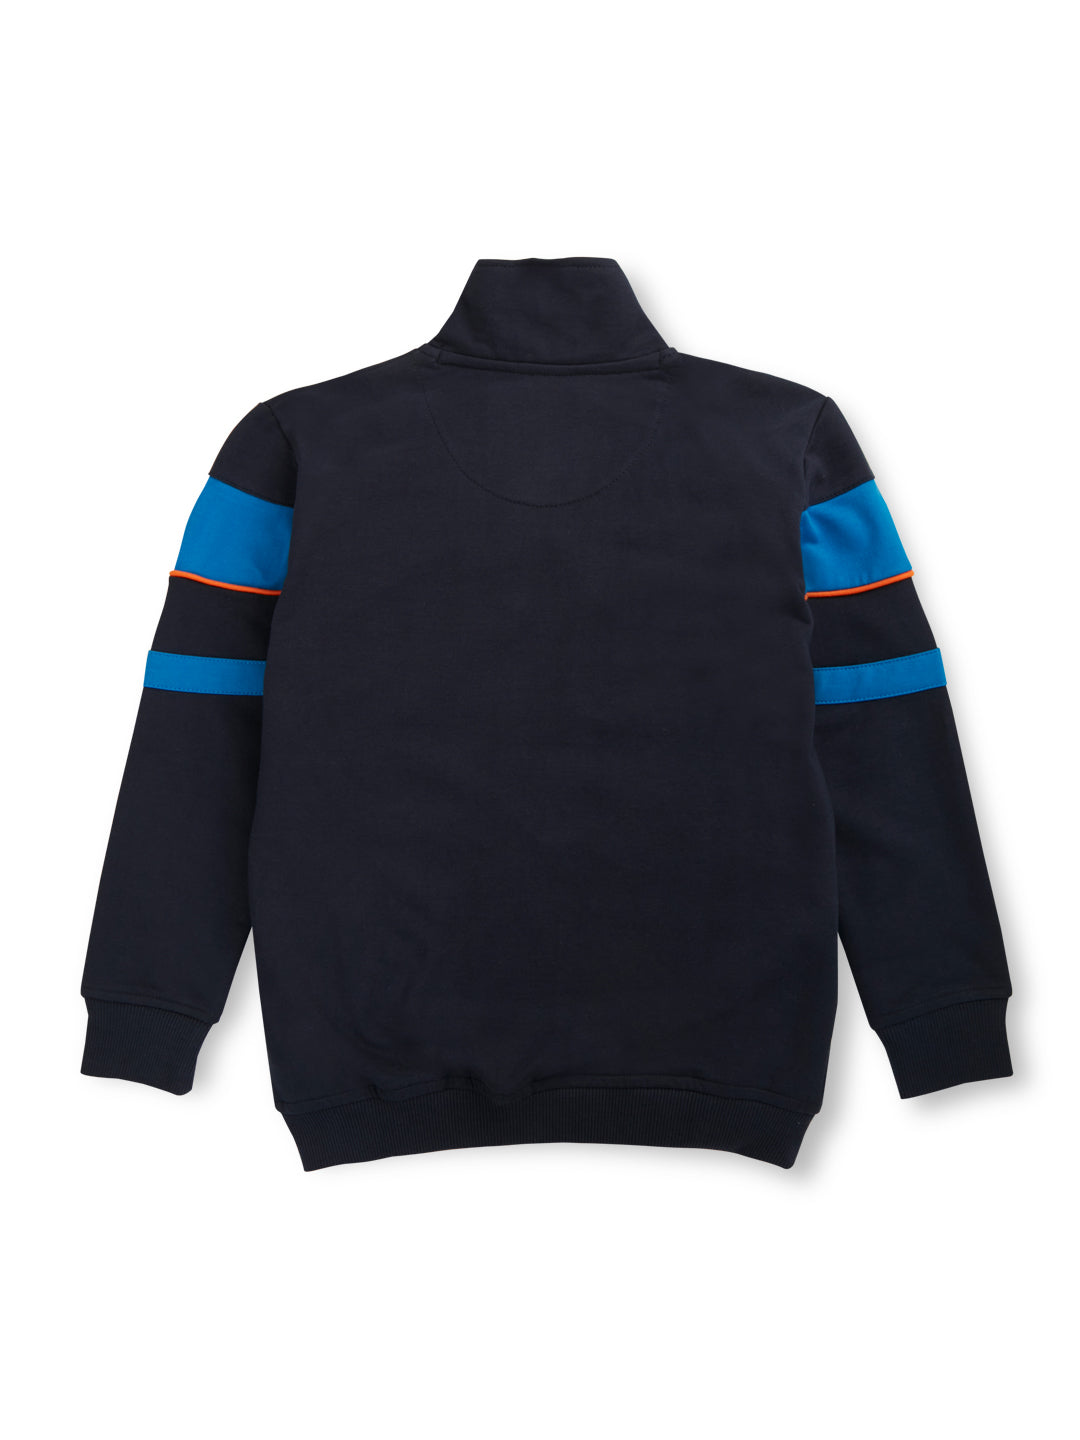 Boys Navy Blue Solid Cotton Full Sleeves Knits Jacket